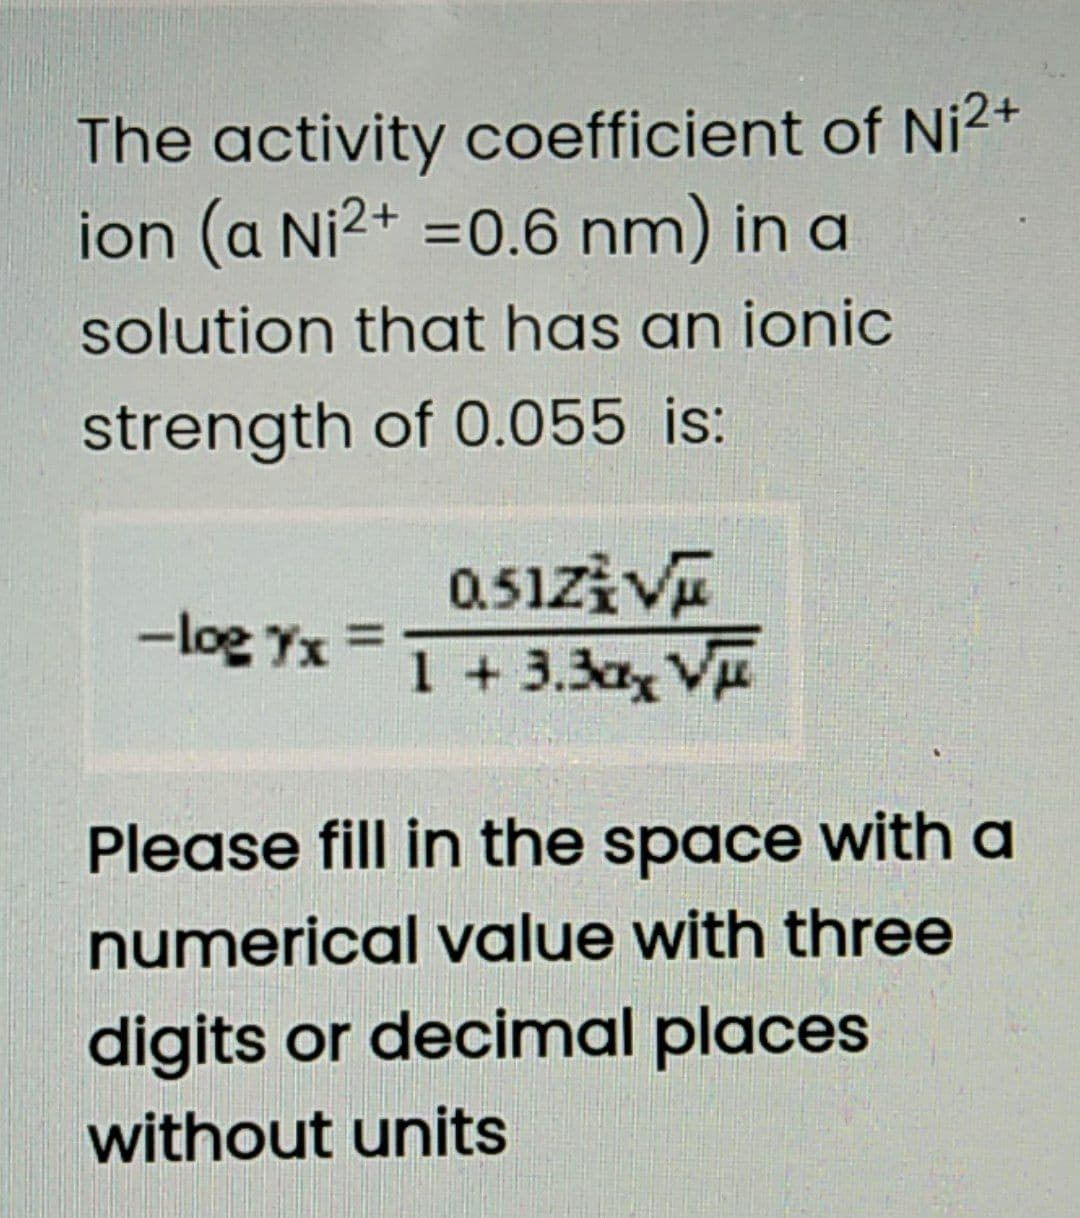 The activity coefficient of Ni2+
ion (a Ni2+ =0.6 nm) in a
solution that has an ionic
strength of 0.055 is:
0.51ziVE
1 +3.3ax V
-log Yx =
Please fill in the space with a
numerical value with three
digits or decimal places
without units
